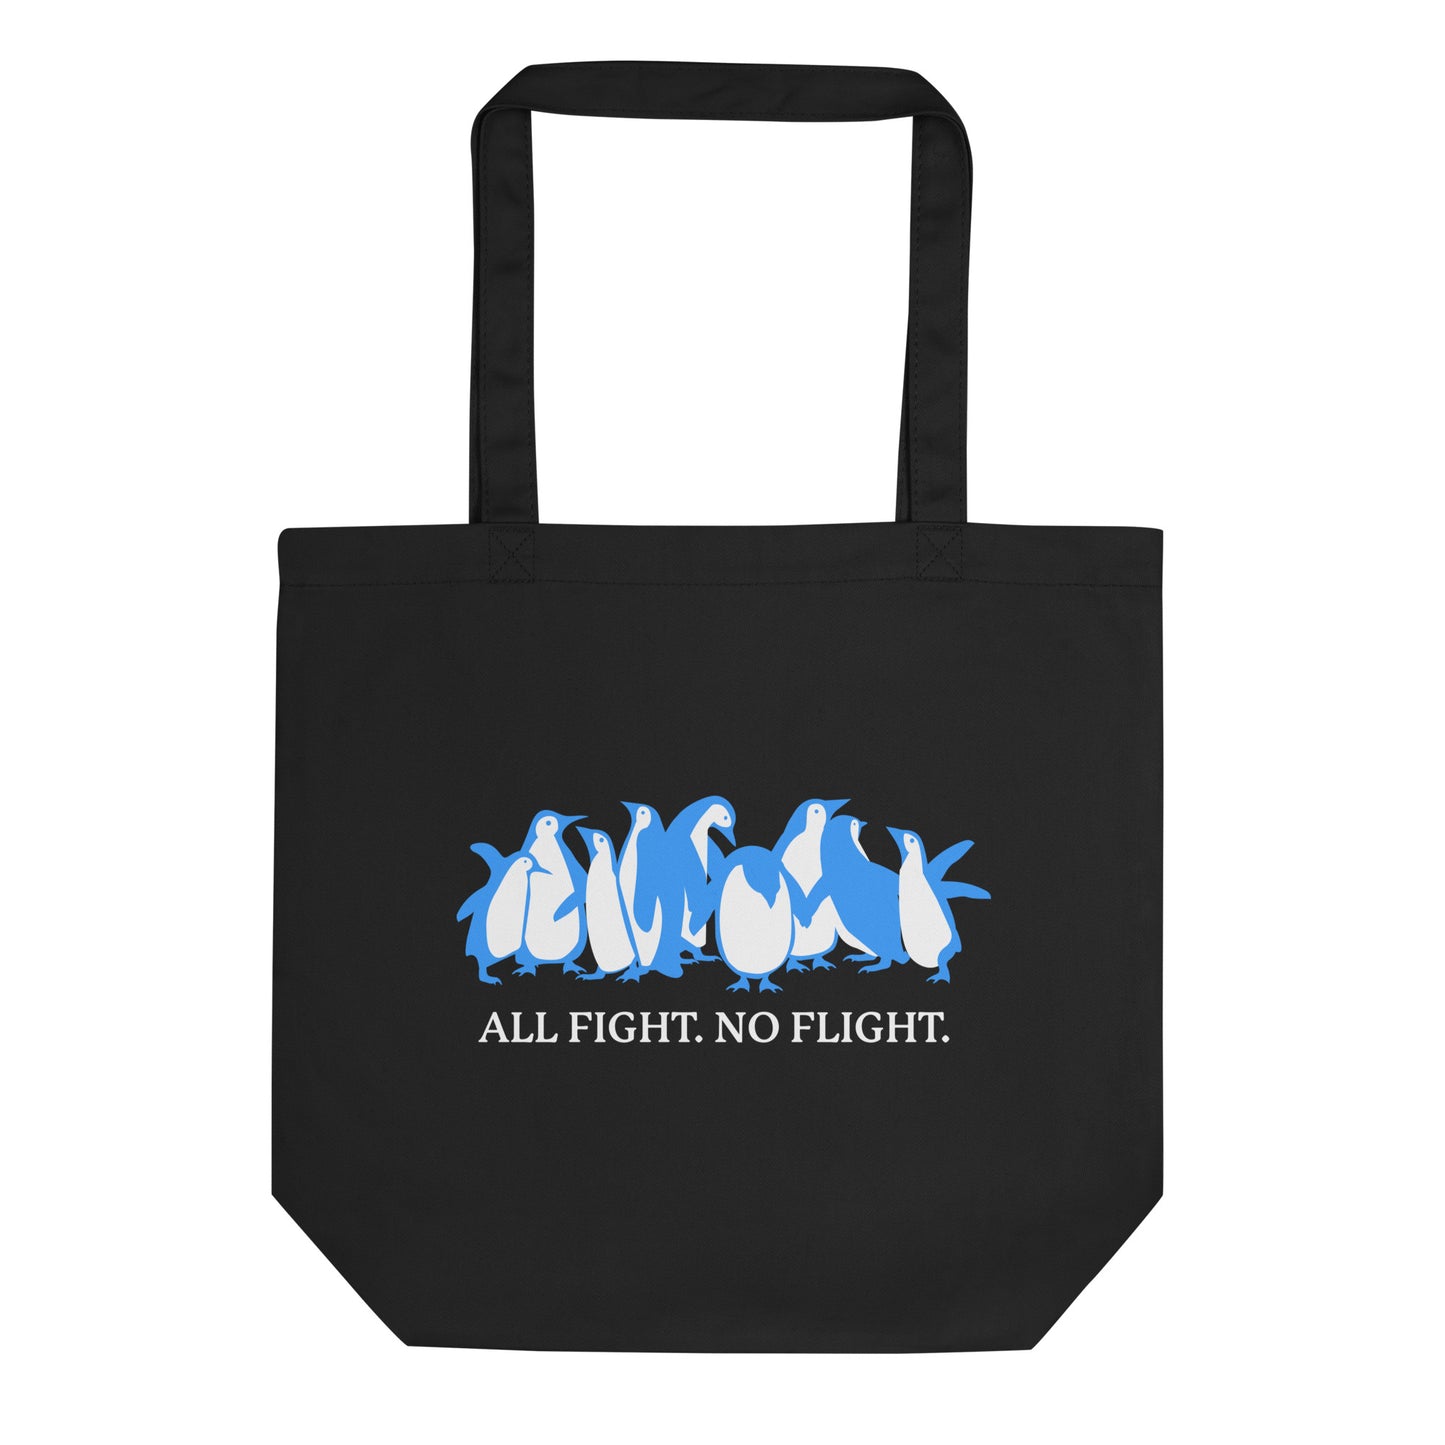 All Fight. No Fight. Tote Bag